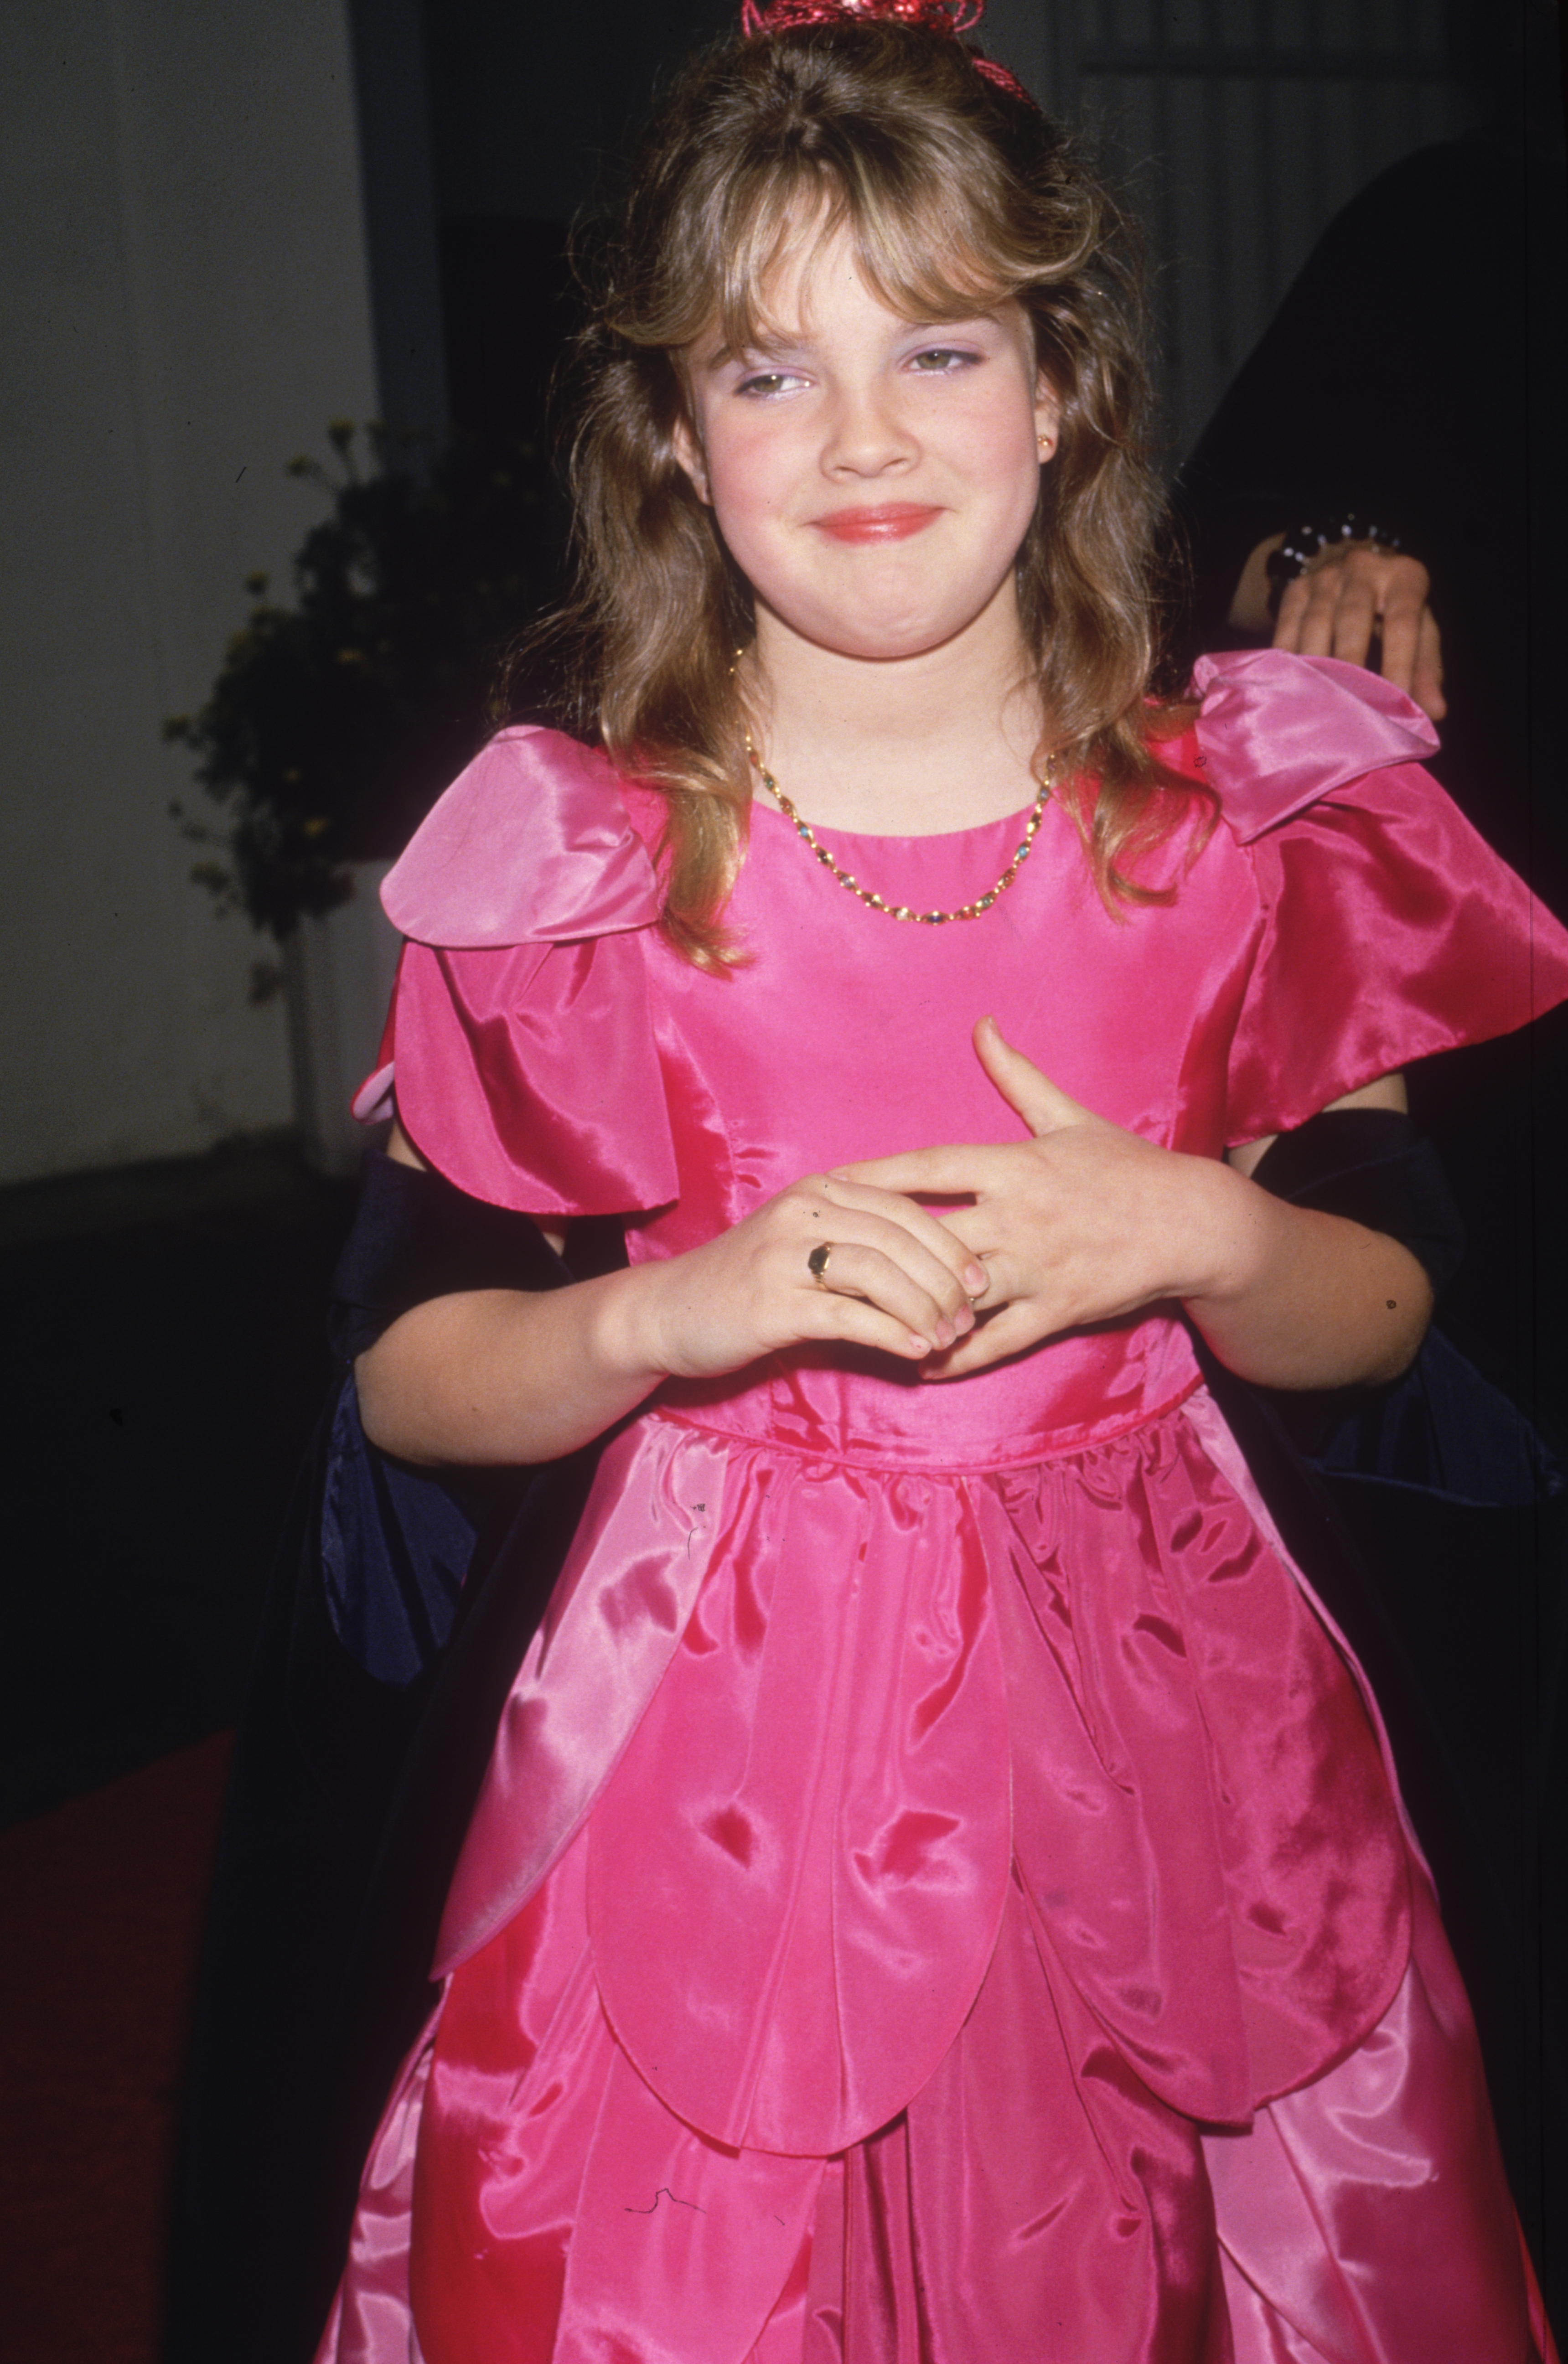 The movie star wearing a bright pink gown and smiling in 1984. | Source: Getty Images